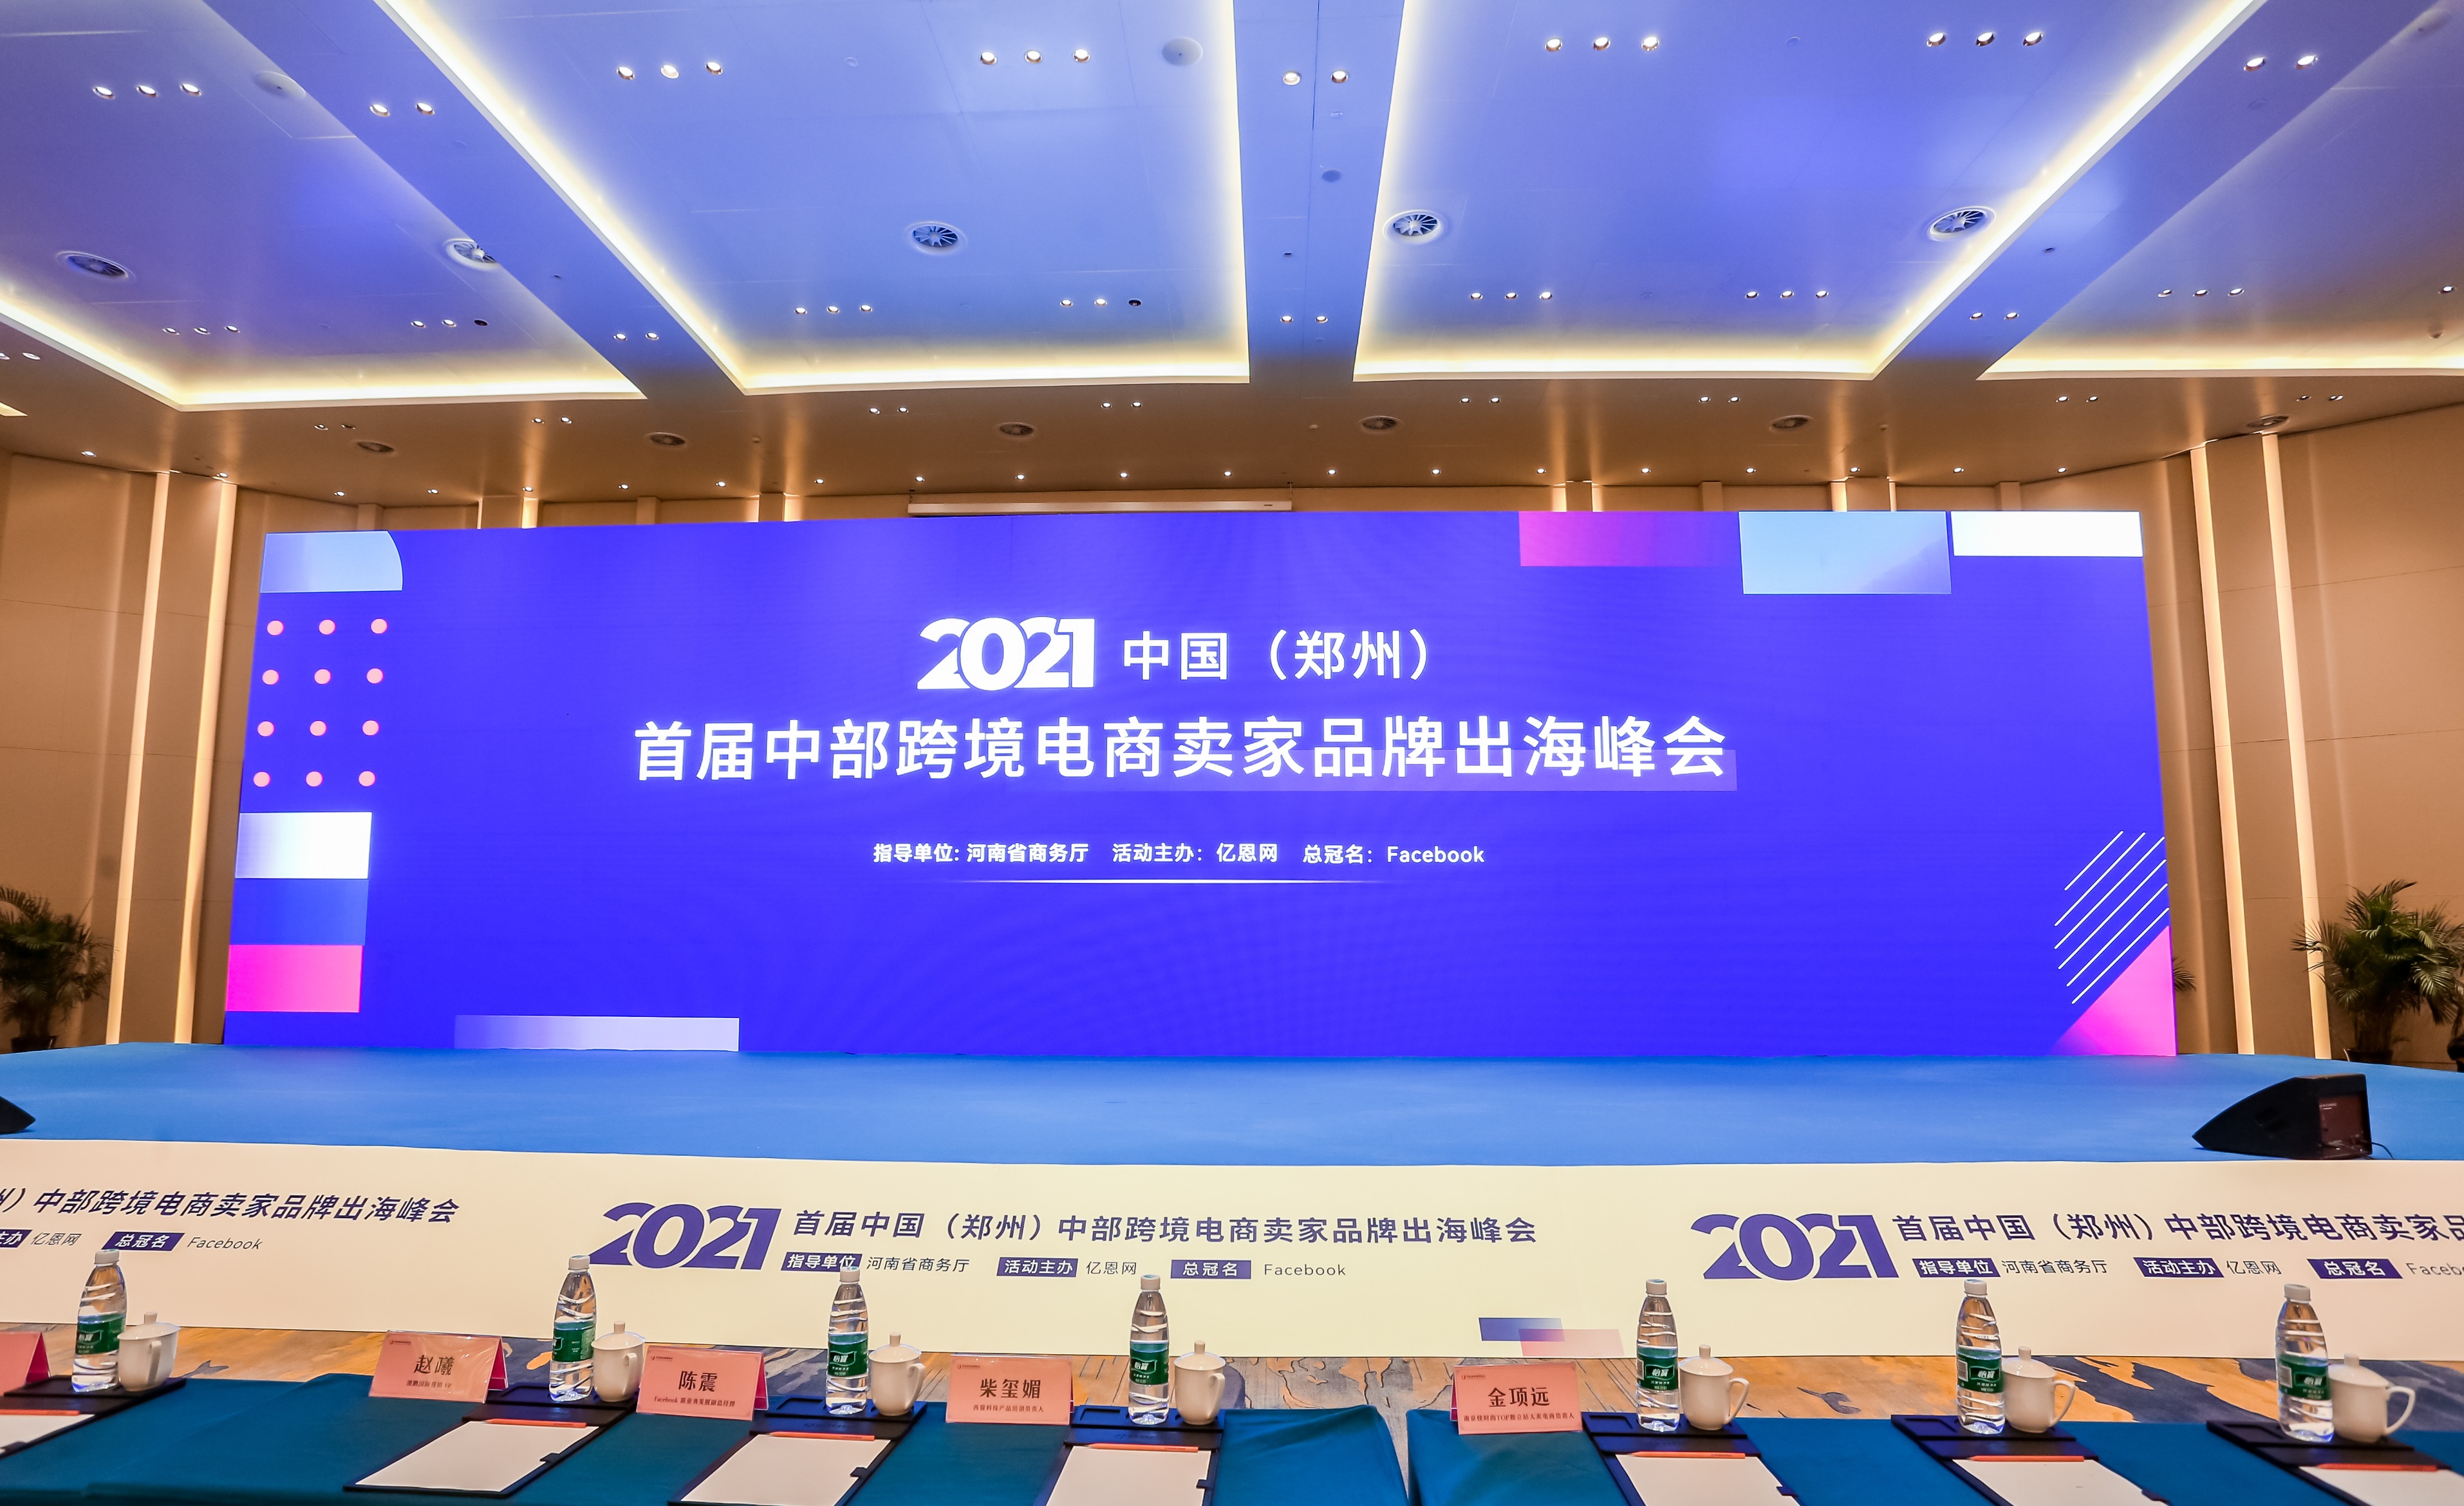 Shoptop made a wonderful appearance at the 2021 First Mid China Cross border E-commerce Seller Brand Summit